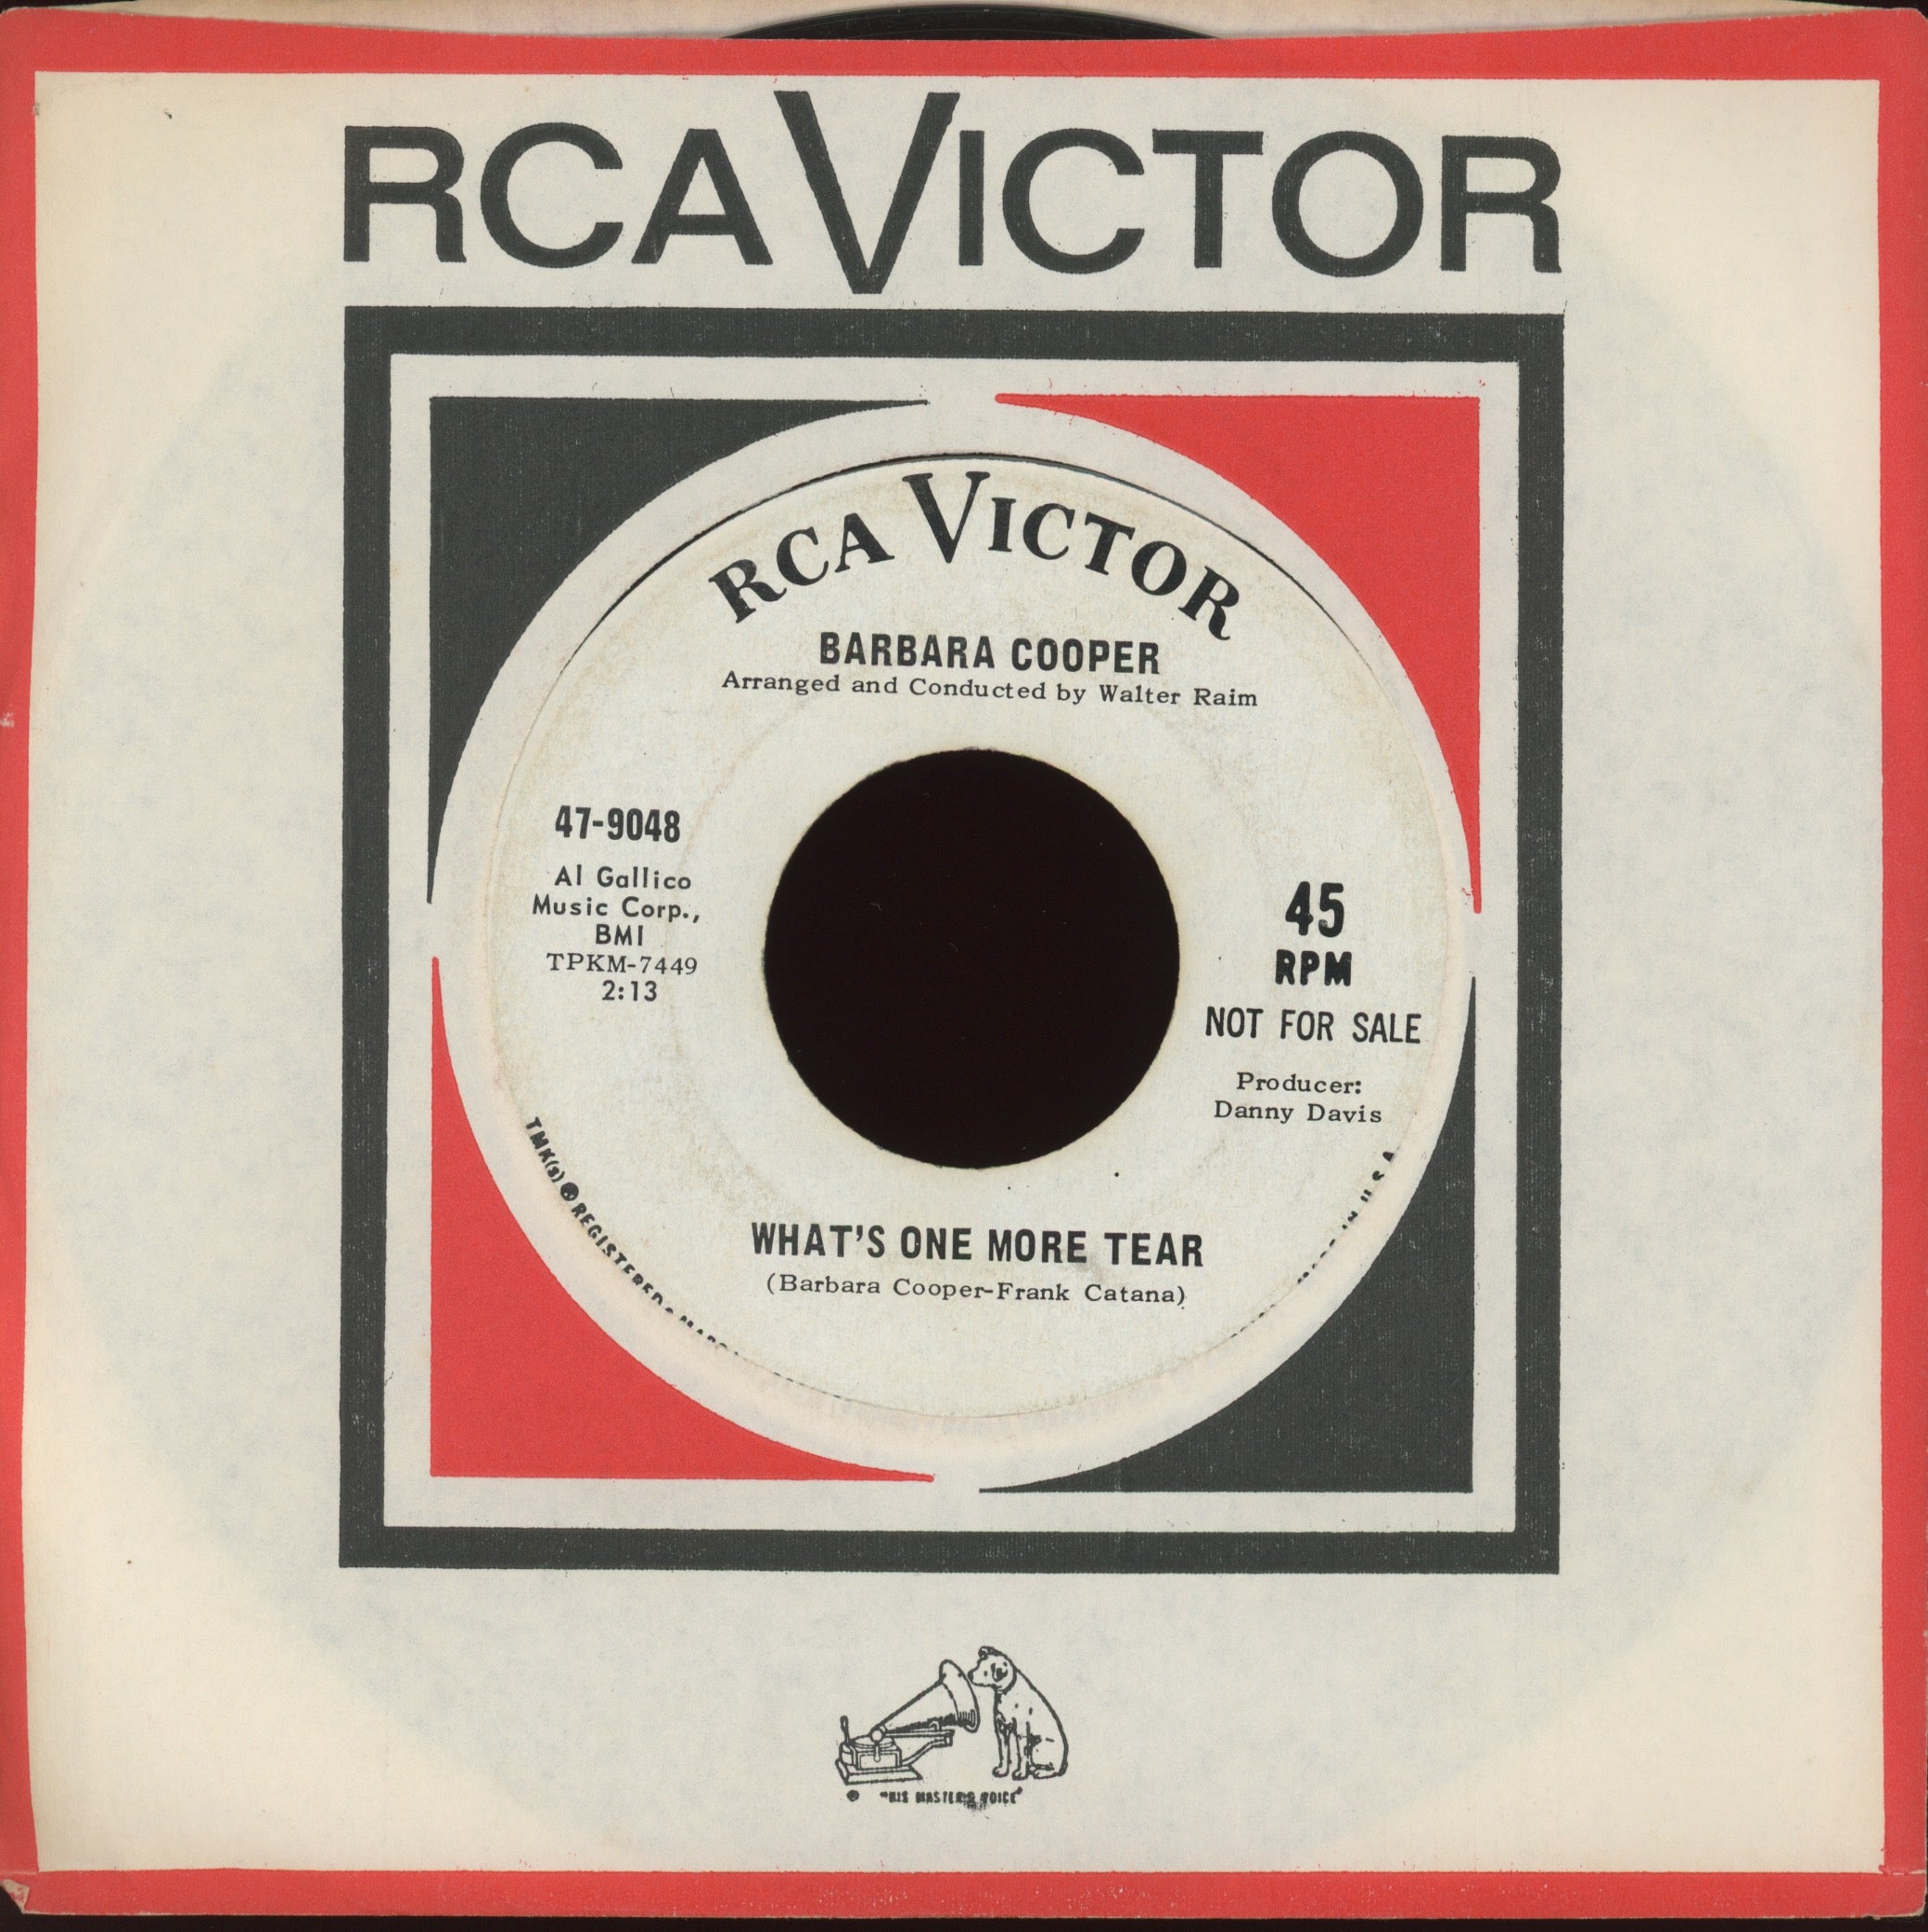 Barbara Cooper - What's One More Tear on RCA Promo Northern Soul 45